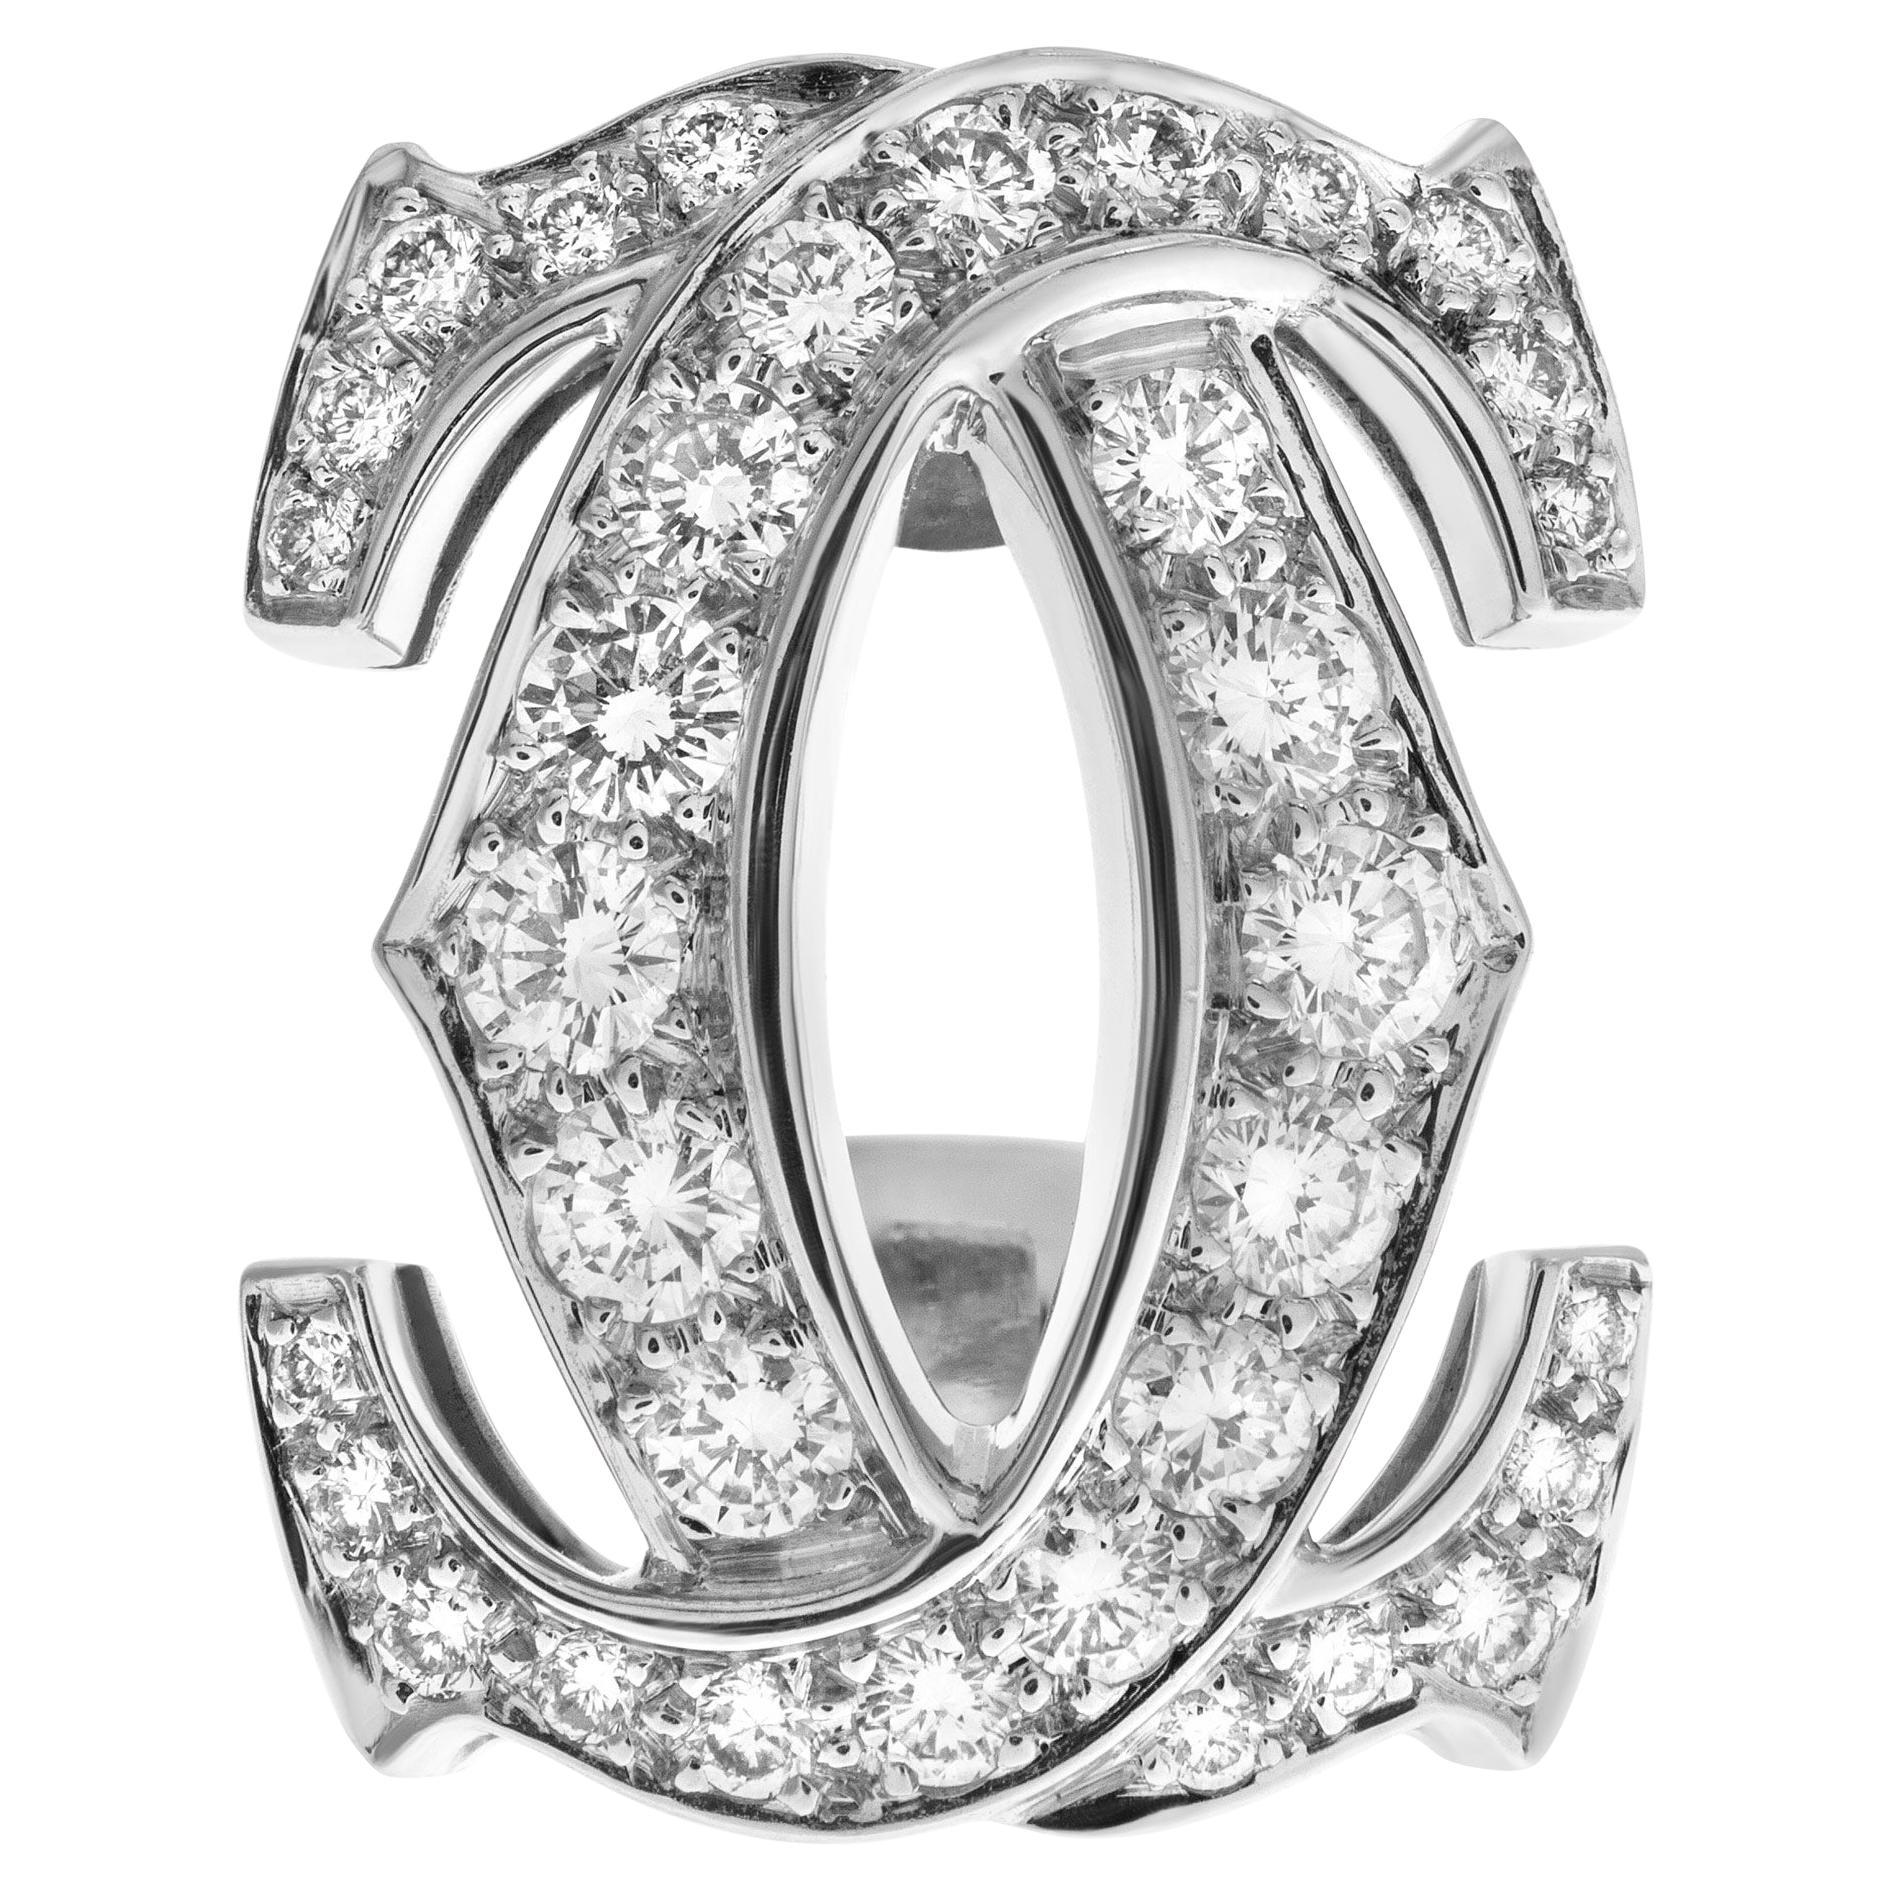 Cartier Earring with 0.84 Carats in Diamond in 18k White Gold, Only One Earring!